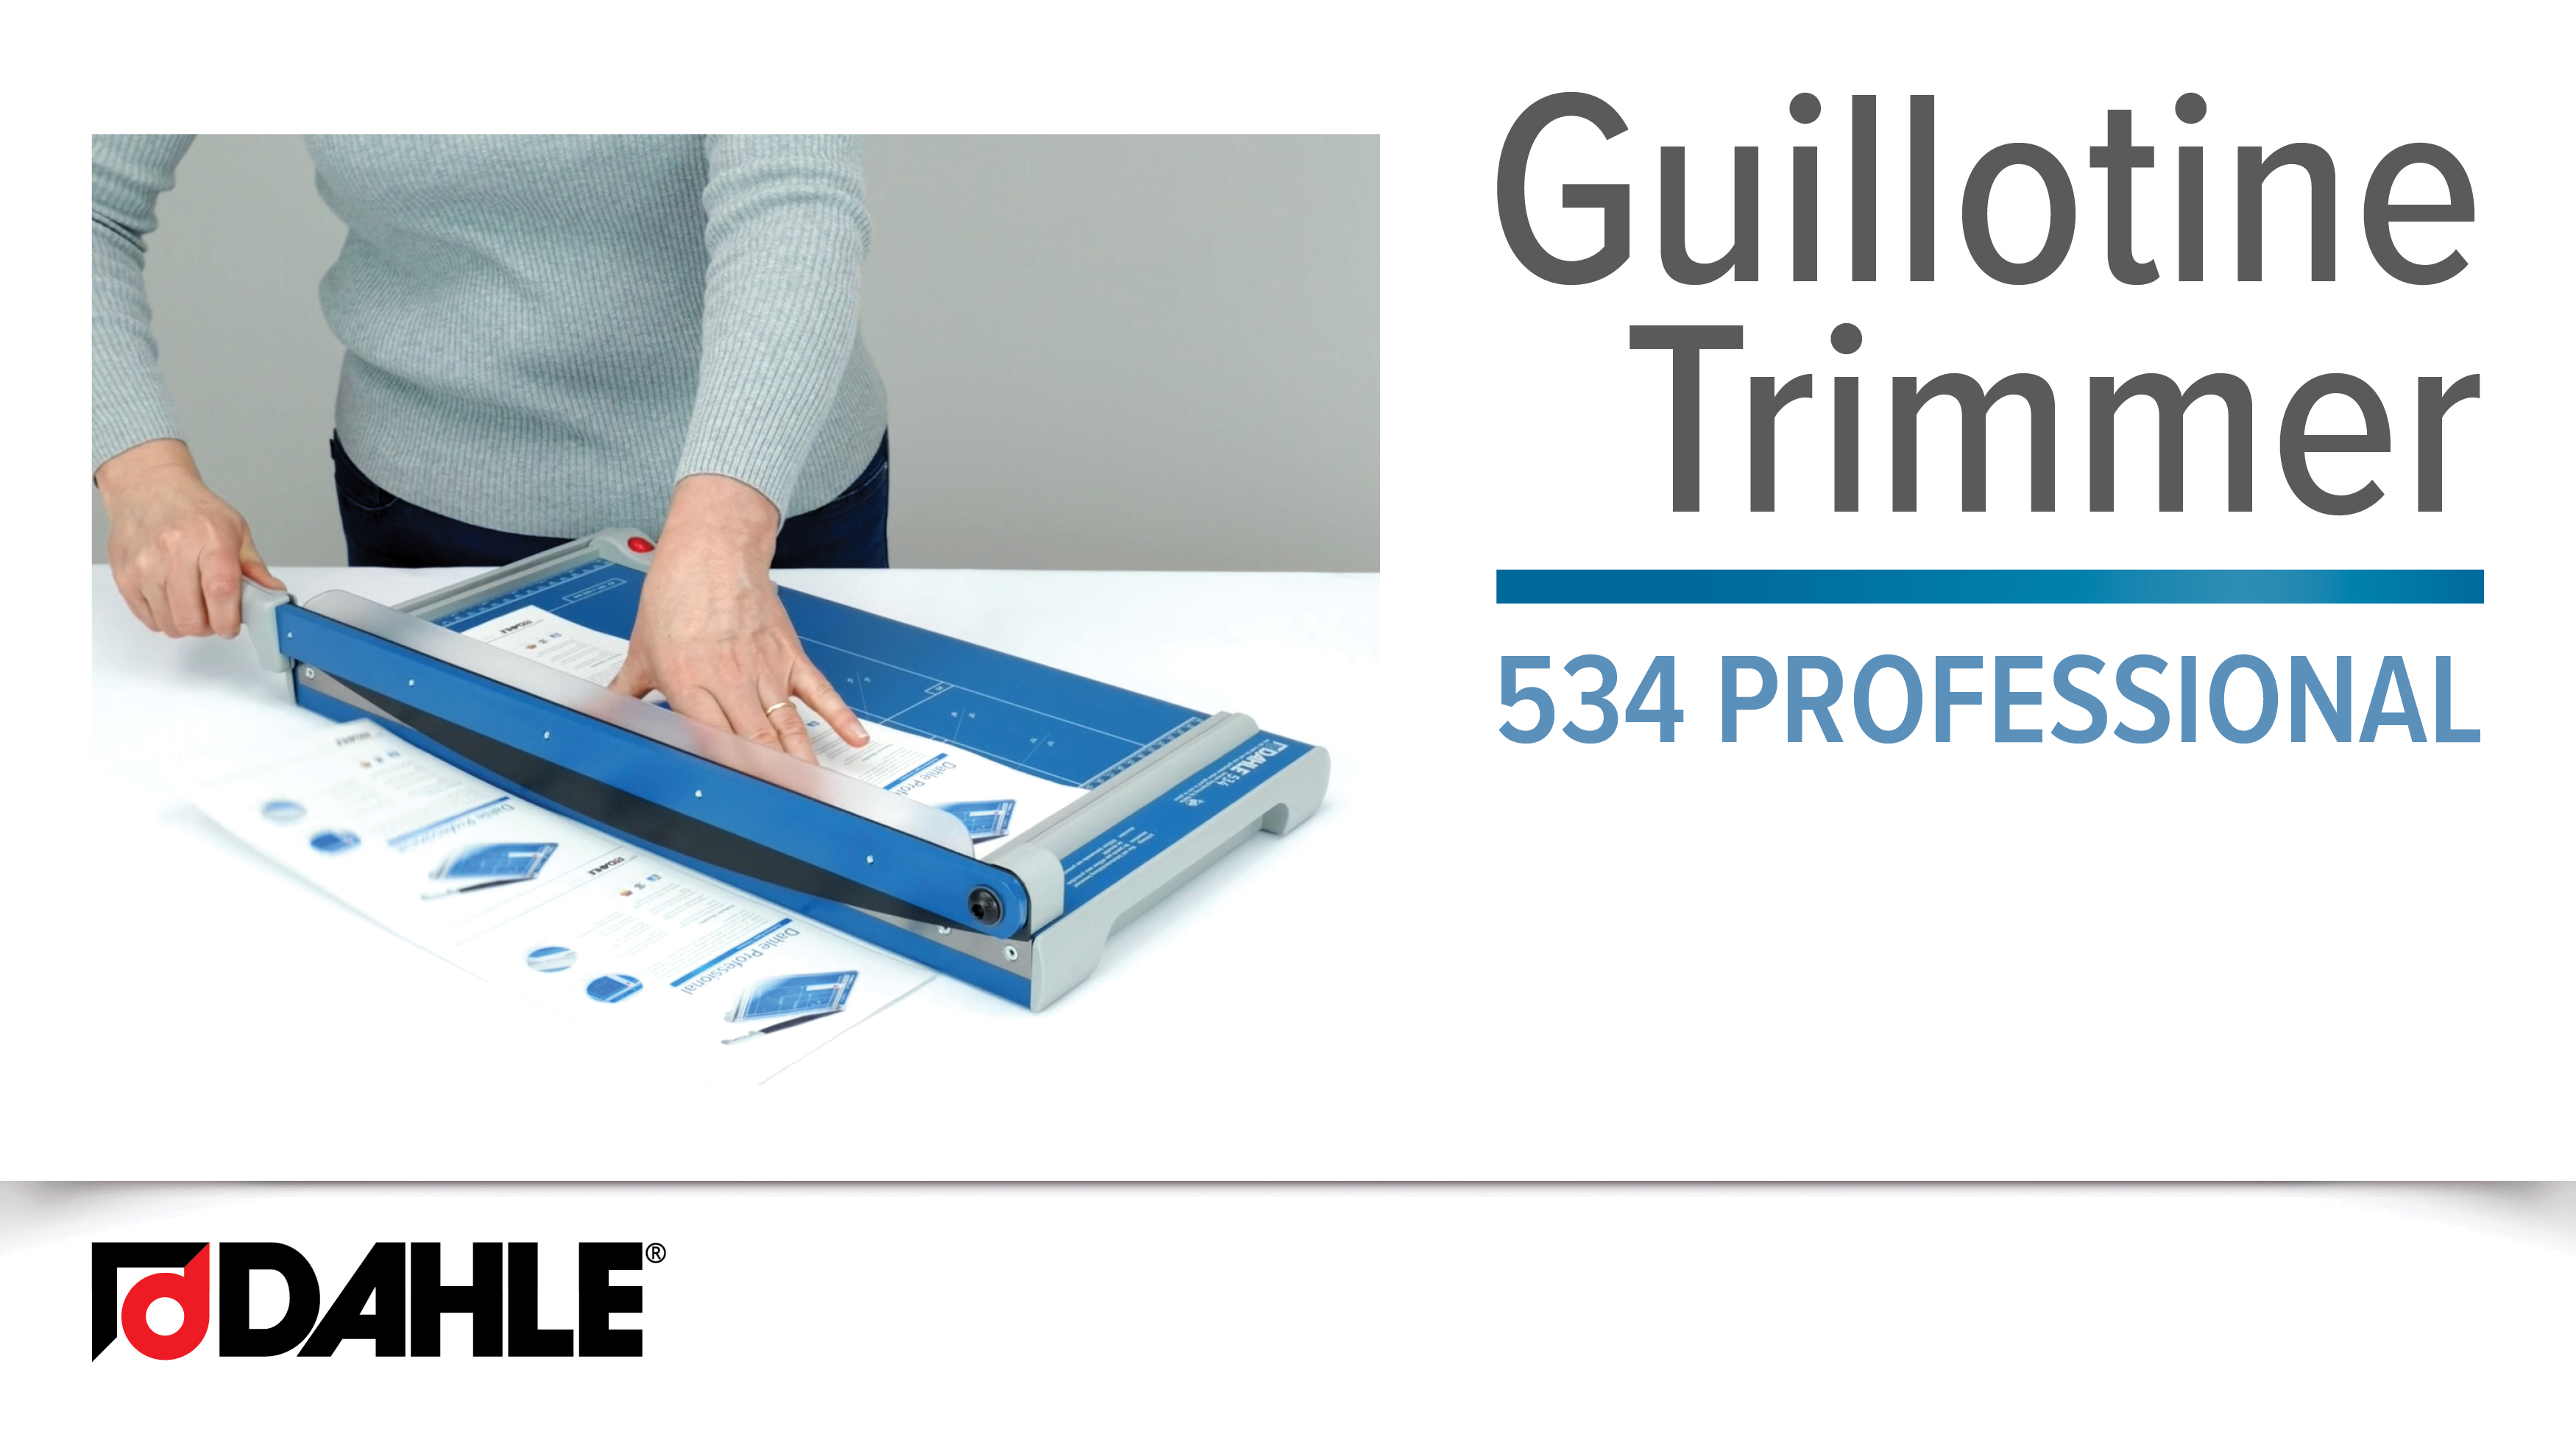 <big><strong>Dahle 534 </strong></big><br>Professional Guillotine